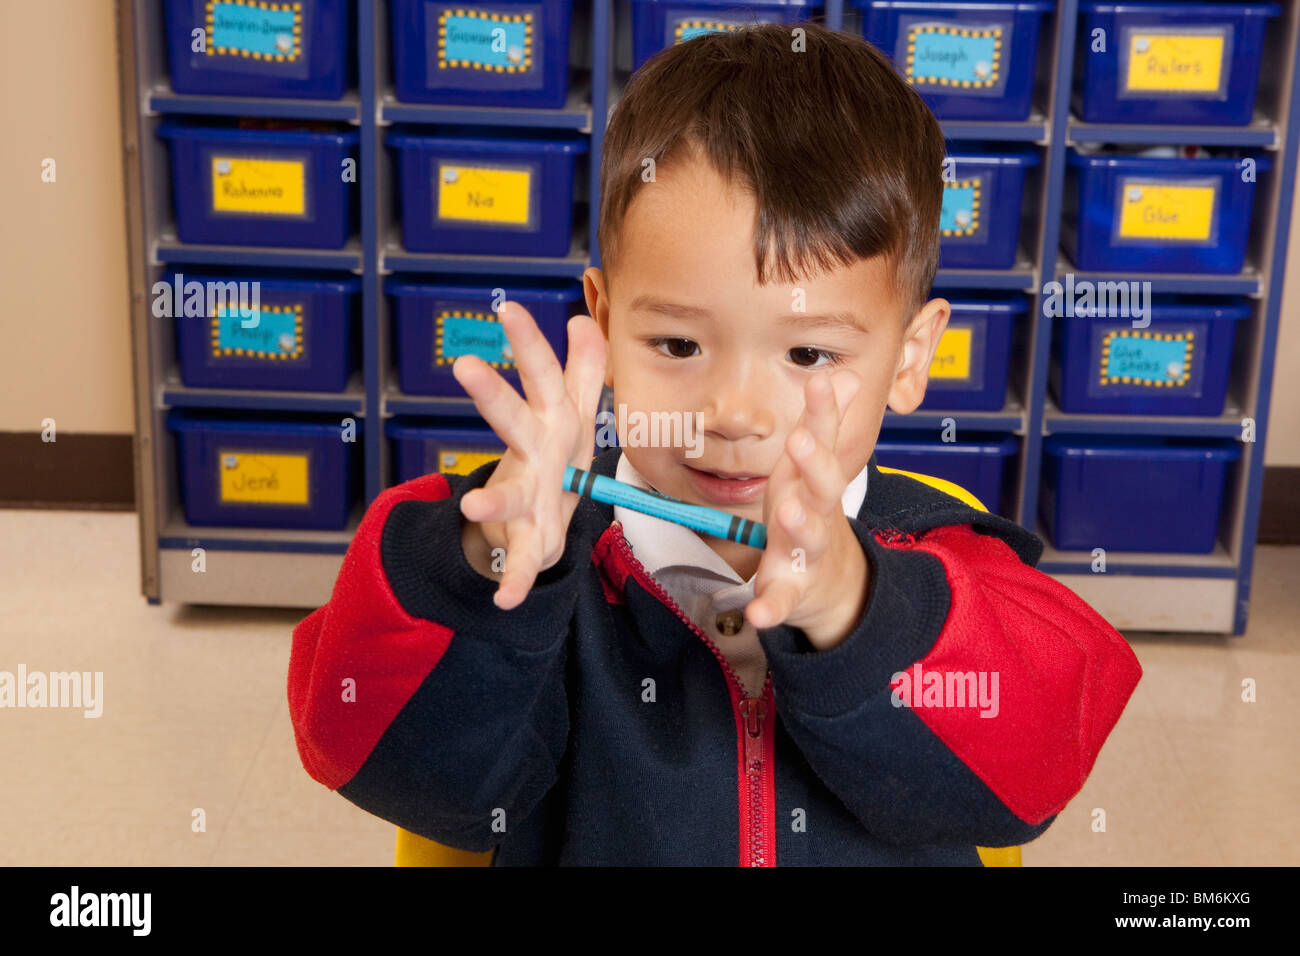 Young Boy Holding A Crayon In His Hands Stock Photo